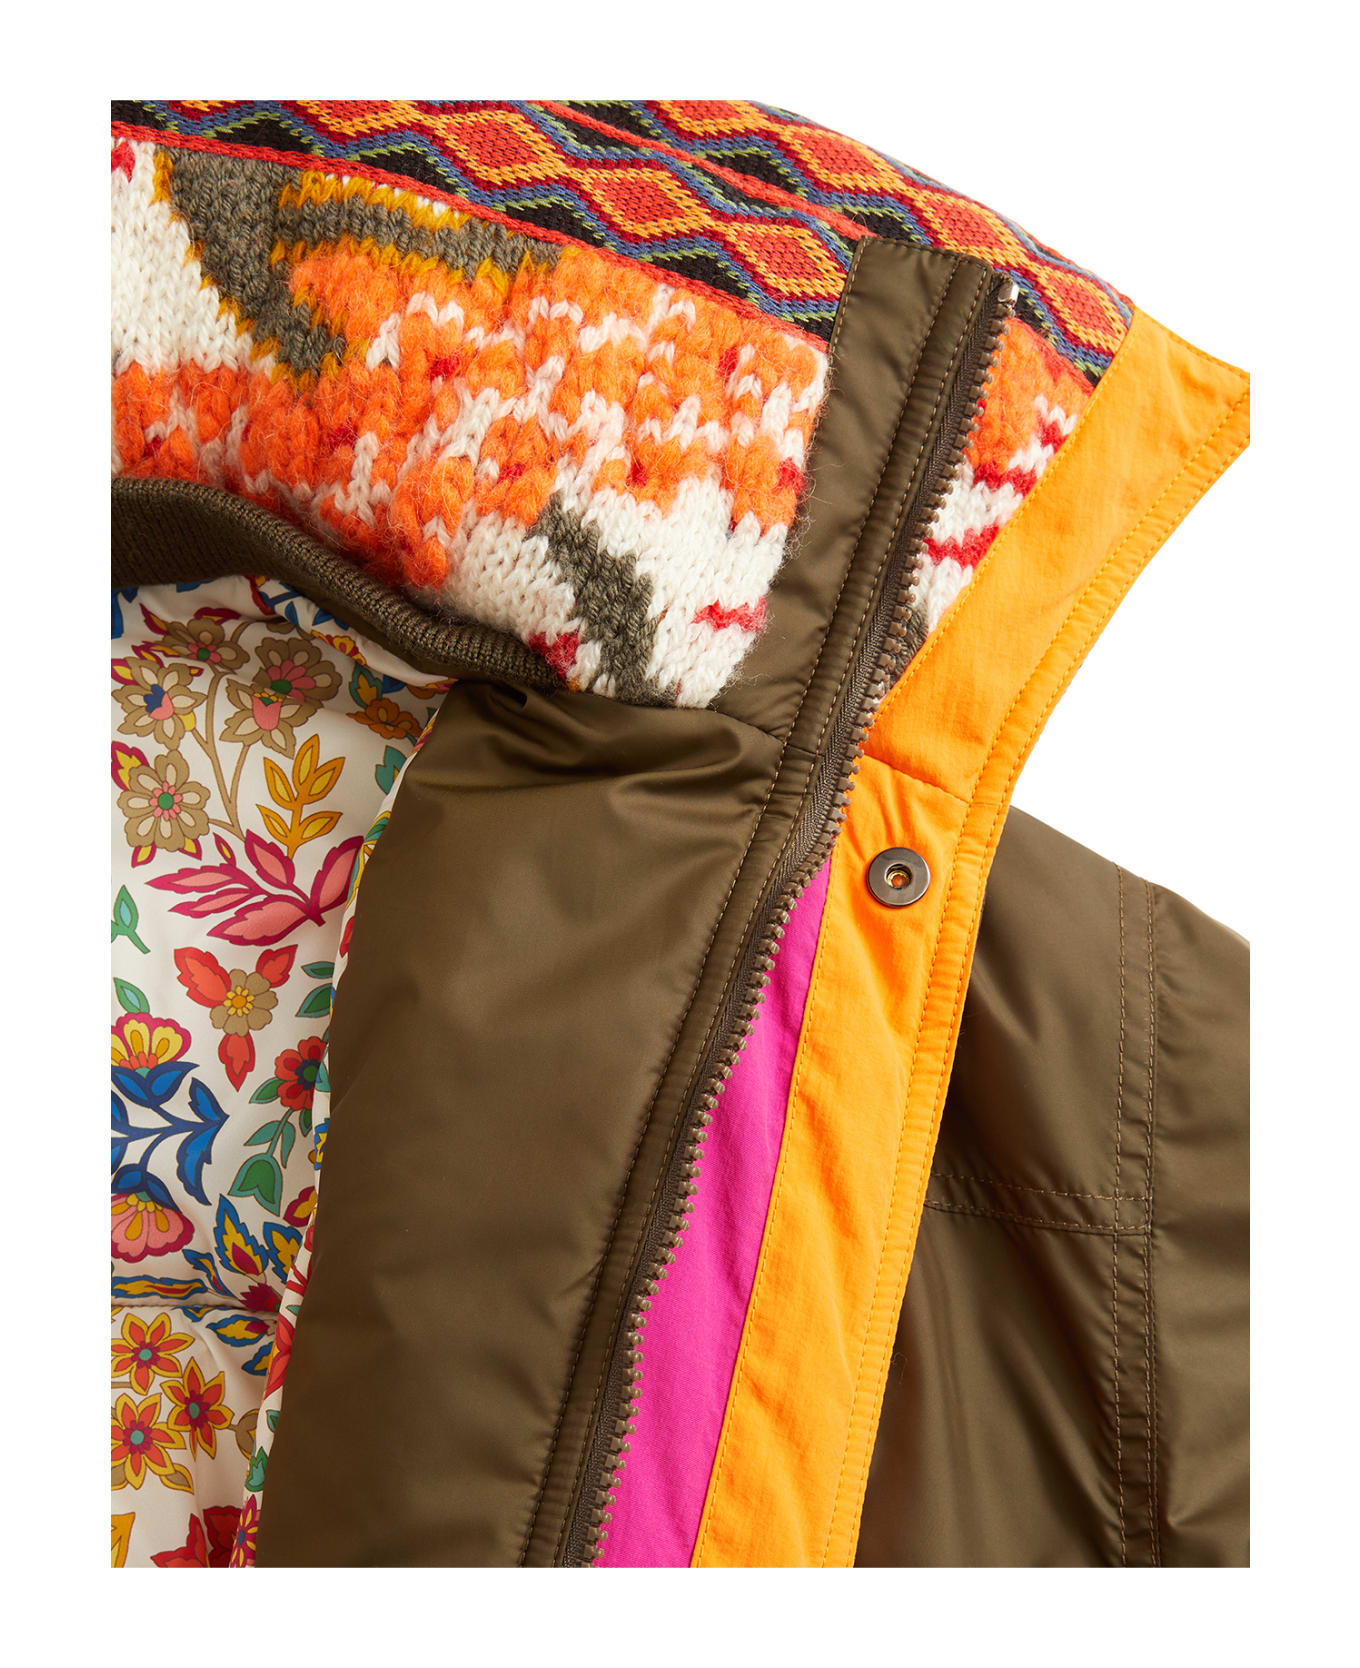 Etro Woman Military Green Jacket With Multicolored Details - MILITARY